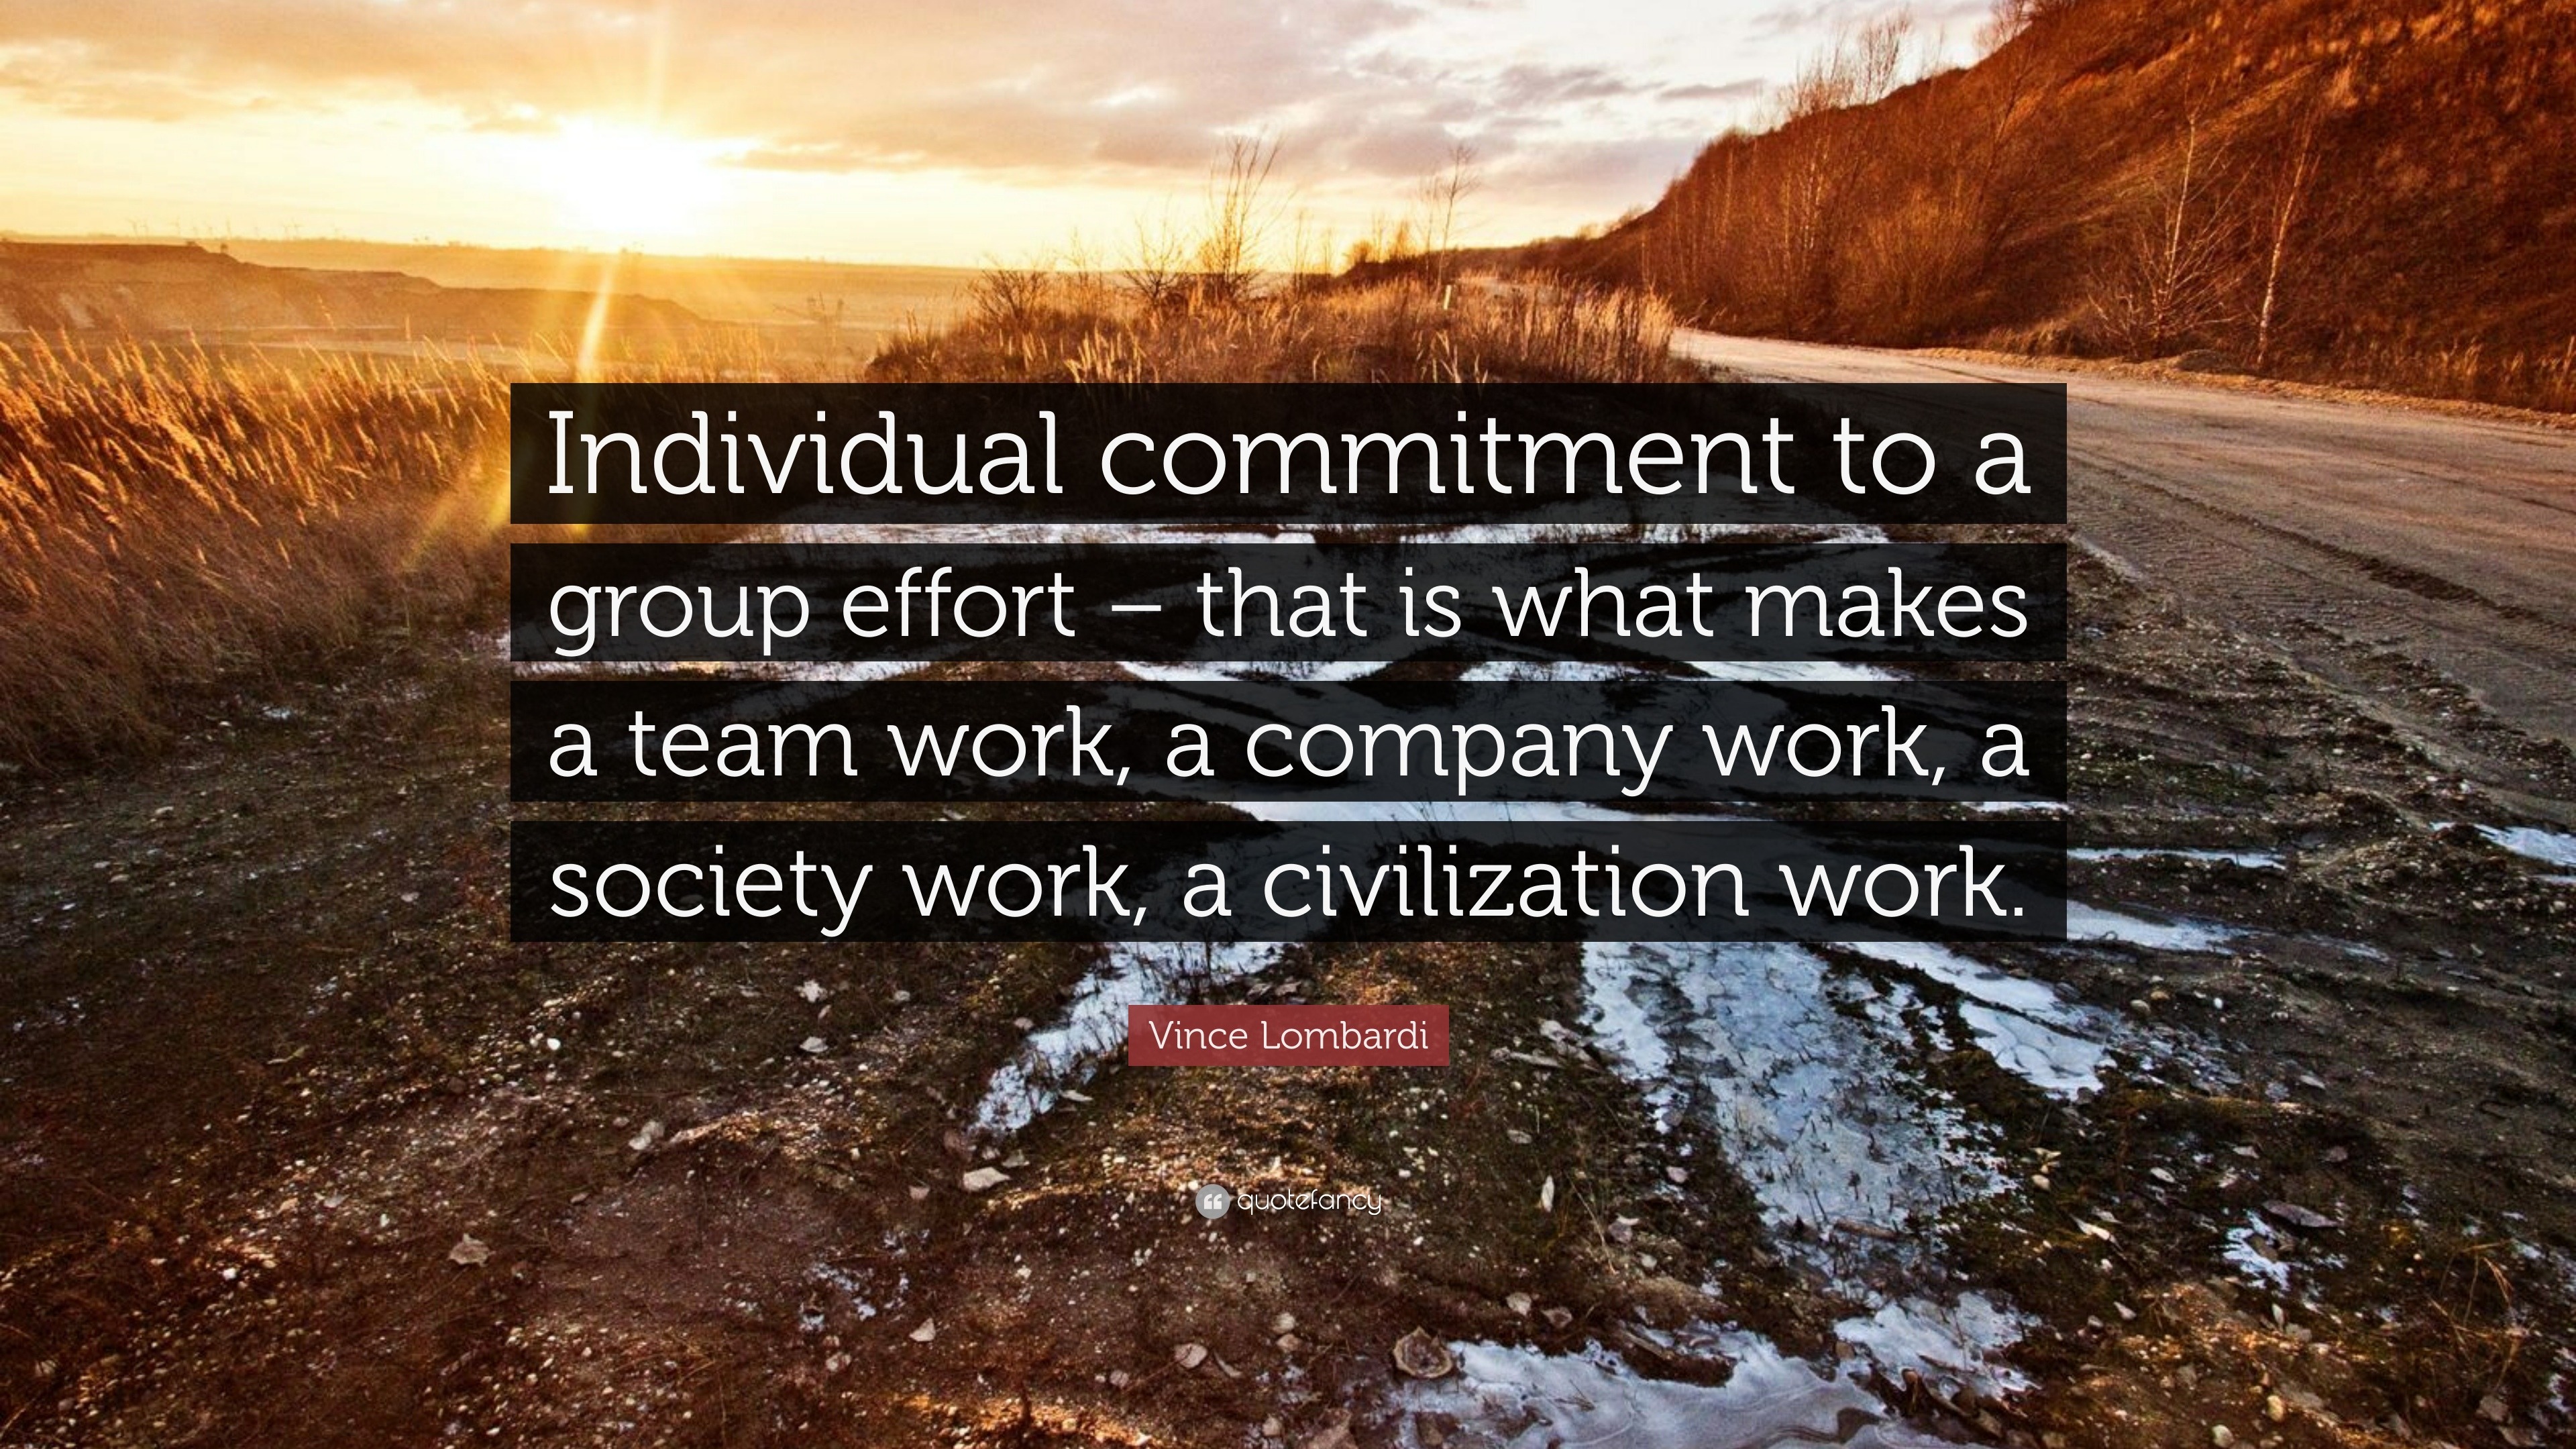 Vince Lombardi Quote: “Individual commitment to a group effort – that